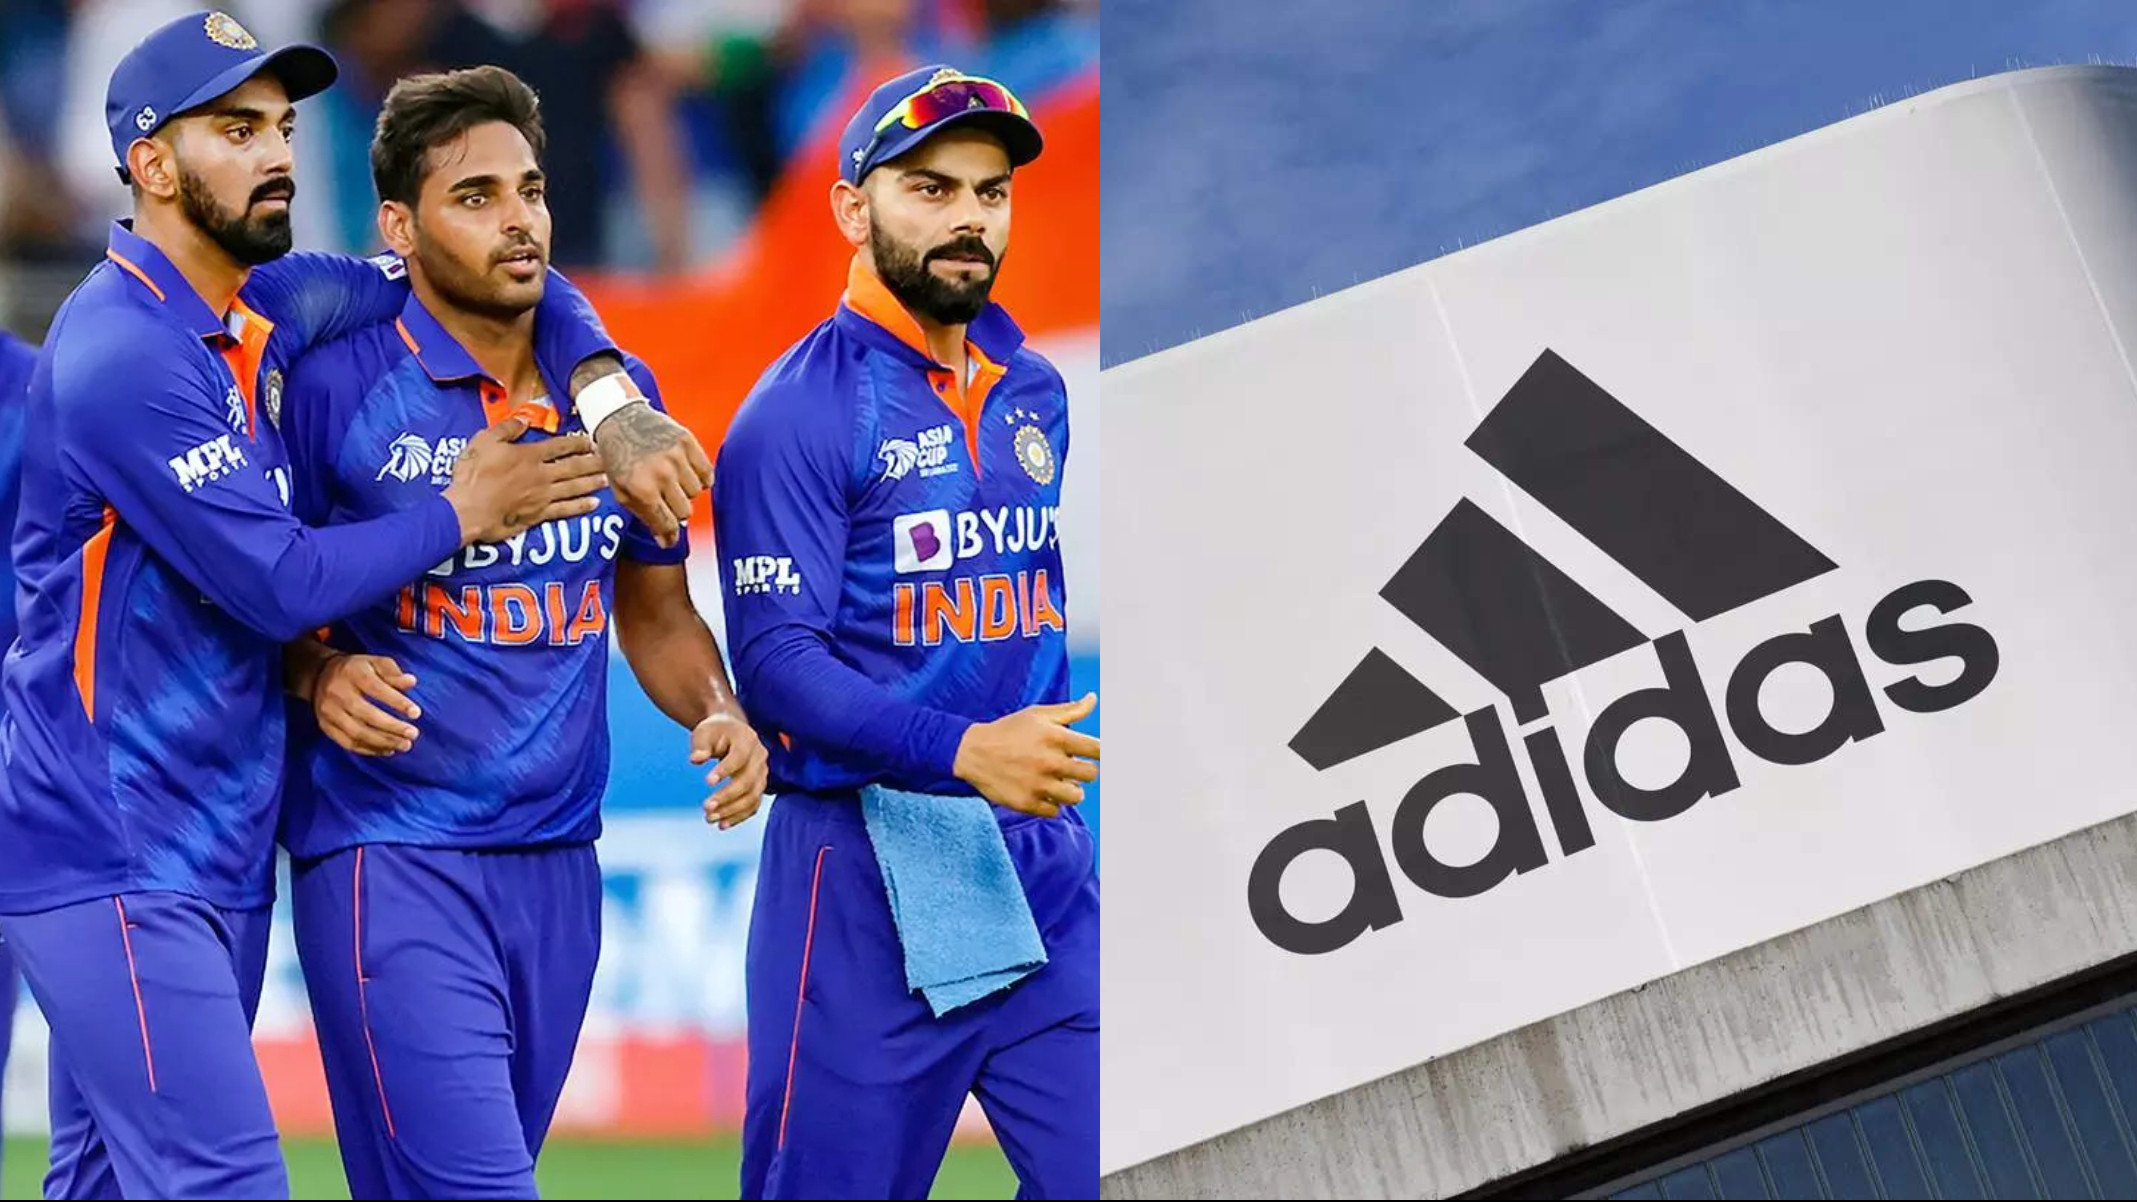 Adidas announced as the new official kit sponsor of Indian Team; to debut new kit in WTC 2023 final